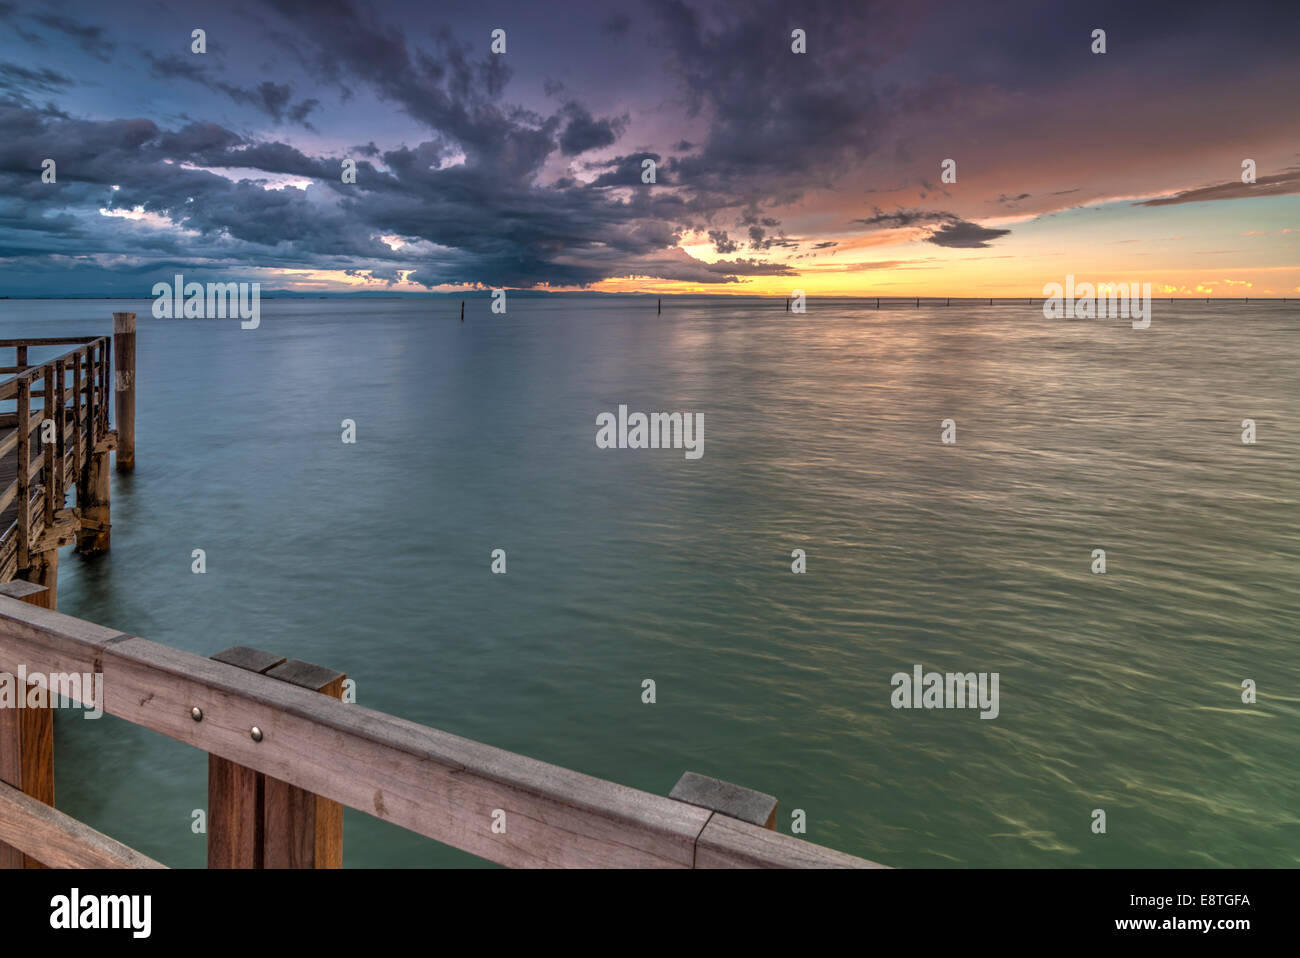 View from wooden pier over the sea with dramatic sky in the background Stock Photo